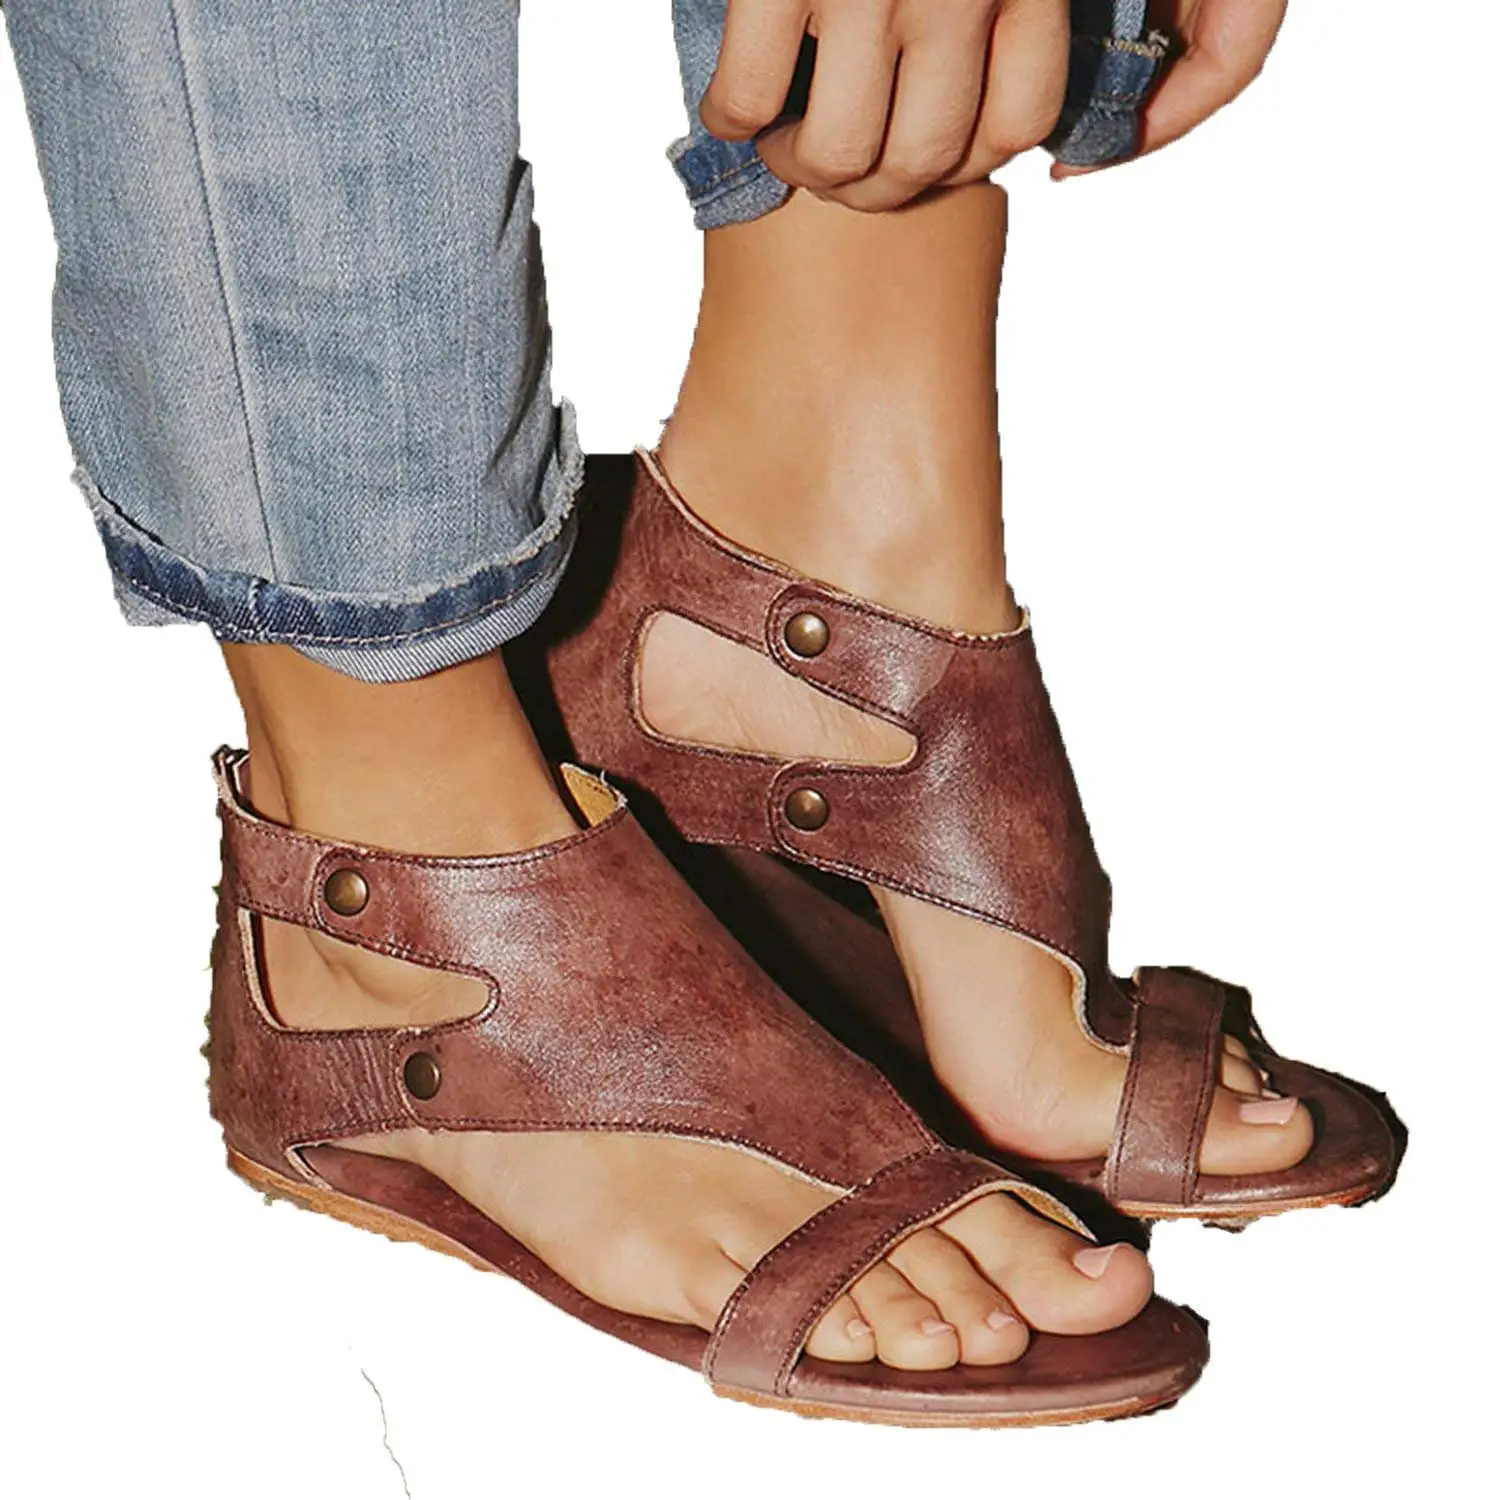 size 12 womens sandals